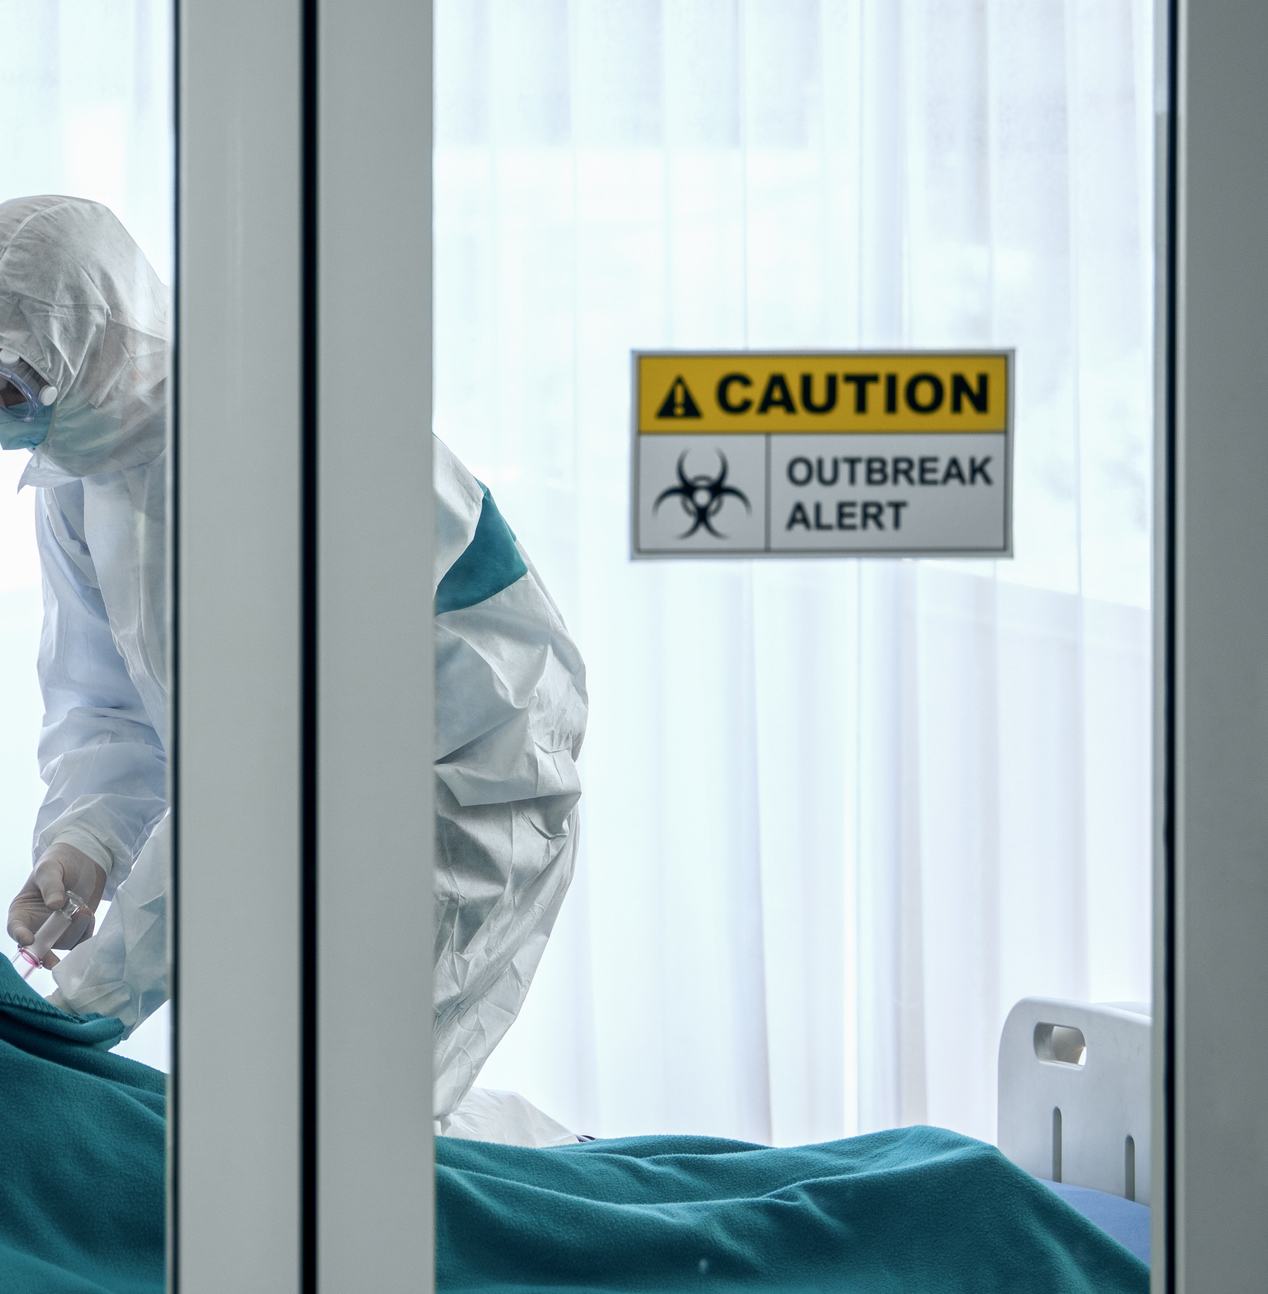 person in biohazard suit giving vaccination to patient in bed